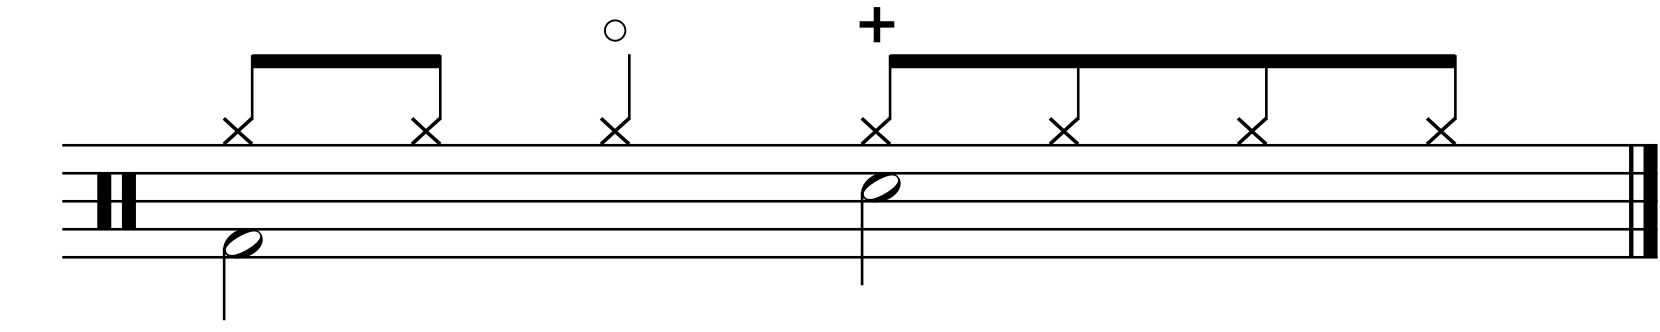 A half time groove with an open hi hat on count 2.